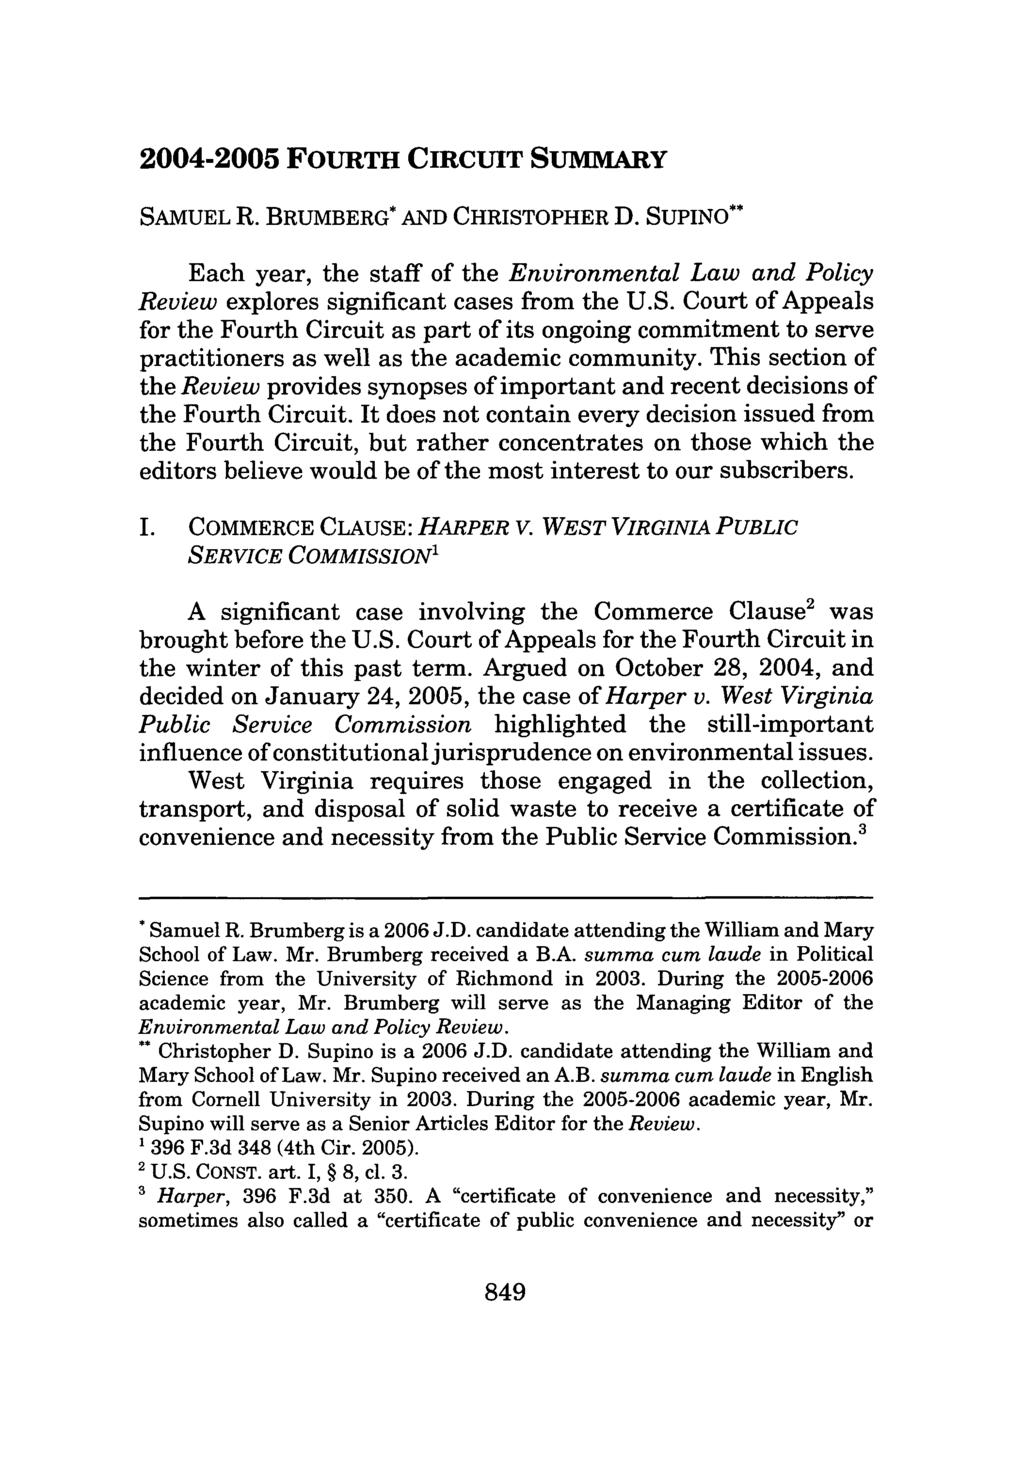 2004-2005 FOURTH CIRCUIT SUMMARY SAMUEL R. BRUMBERG* AND CHRISTOPHER D. SUPINO** Each year, the staff of the Environmental Law and Policy Review explores significant cases from the U.S. Court of Appeals for the Fourth Circuit as part of its ongoing commitment to serve practitioners as well as the academic community.